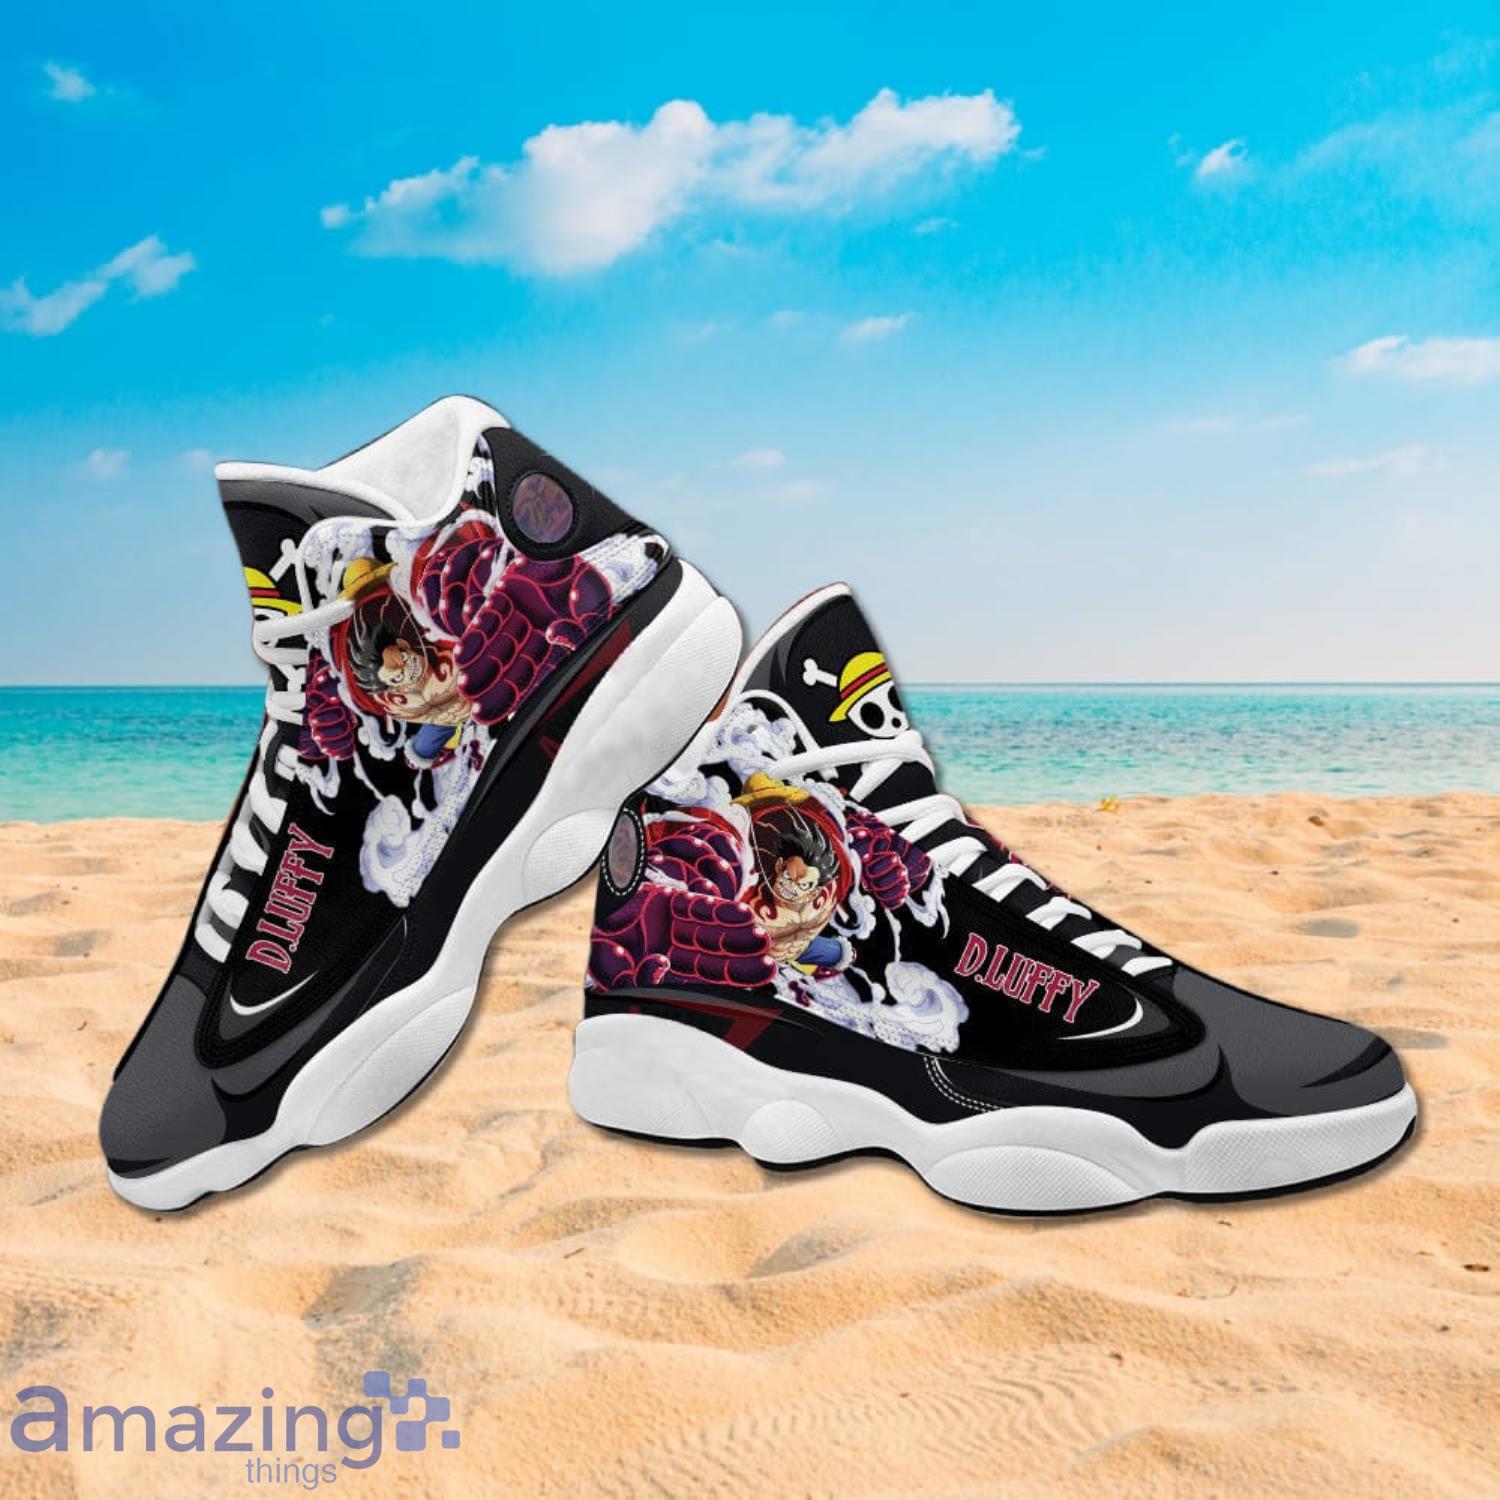 Luffy Gear 4 Jordan 13 Shoes One Piece Custom Shoes - Official One